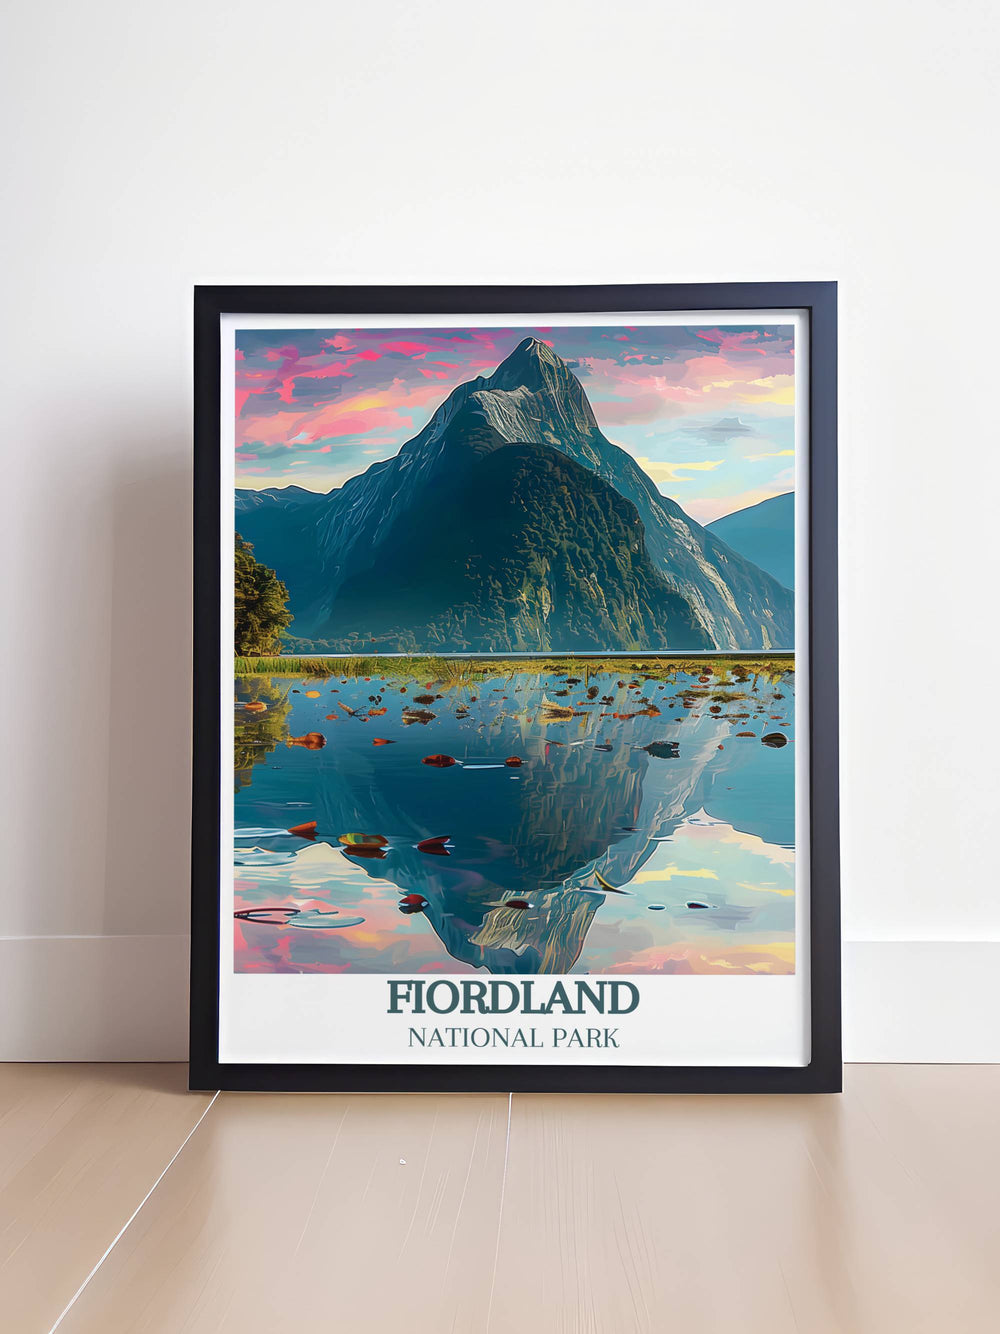 Morning light illuminates the rugged face of Mitre Peak, highlighting its impressive elevation and the surrounding native forests in a custom print designed for outdoor enthusiasts.